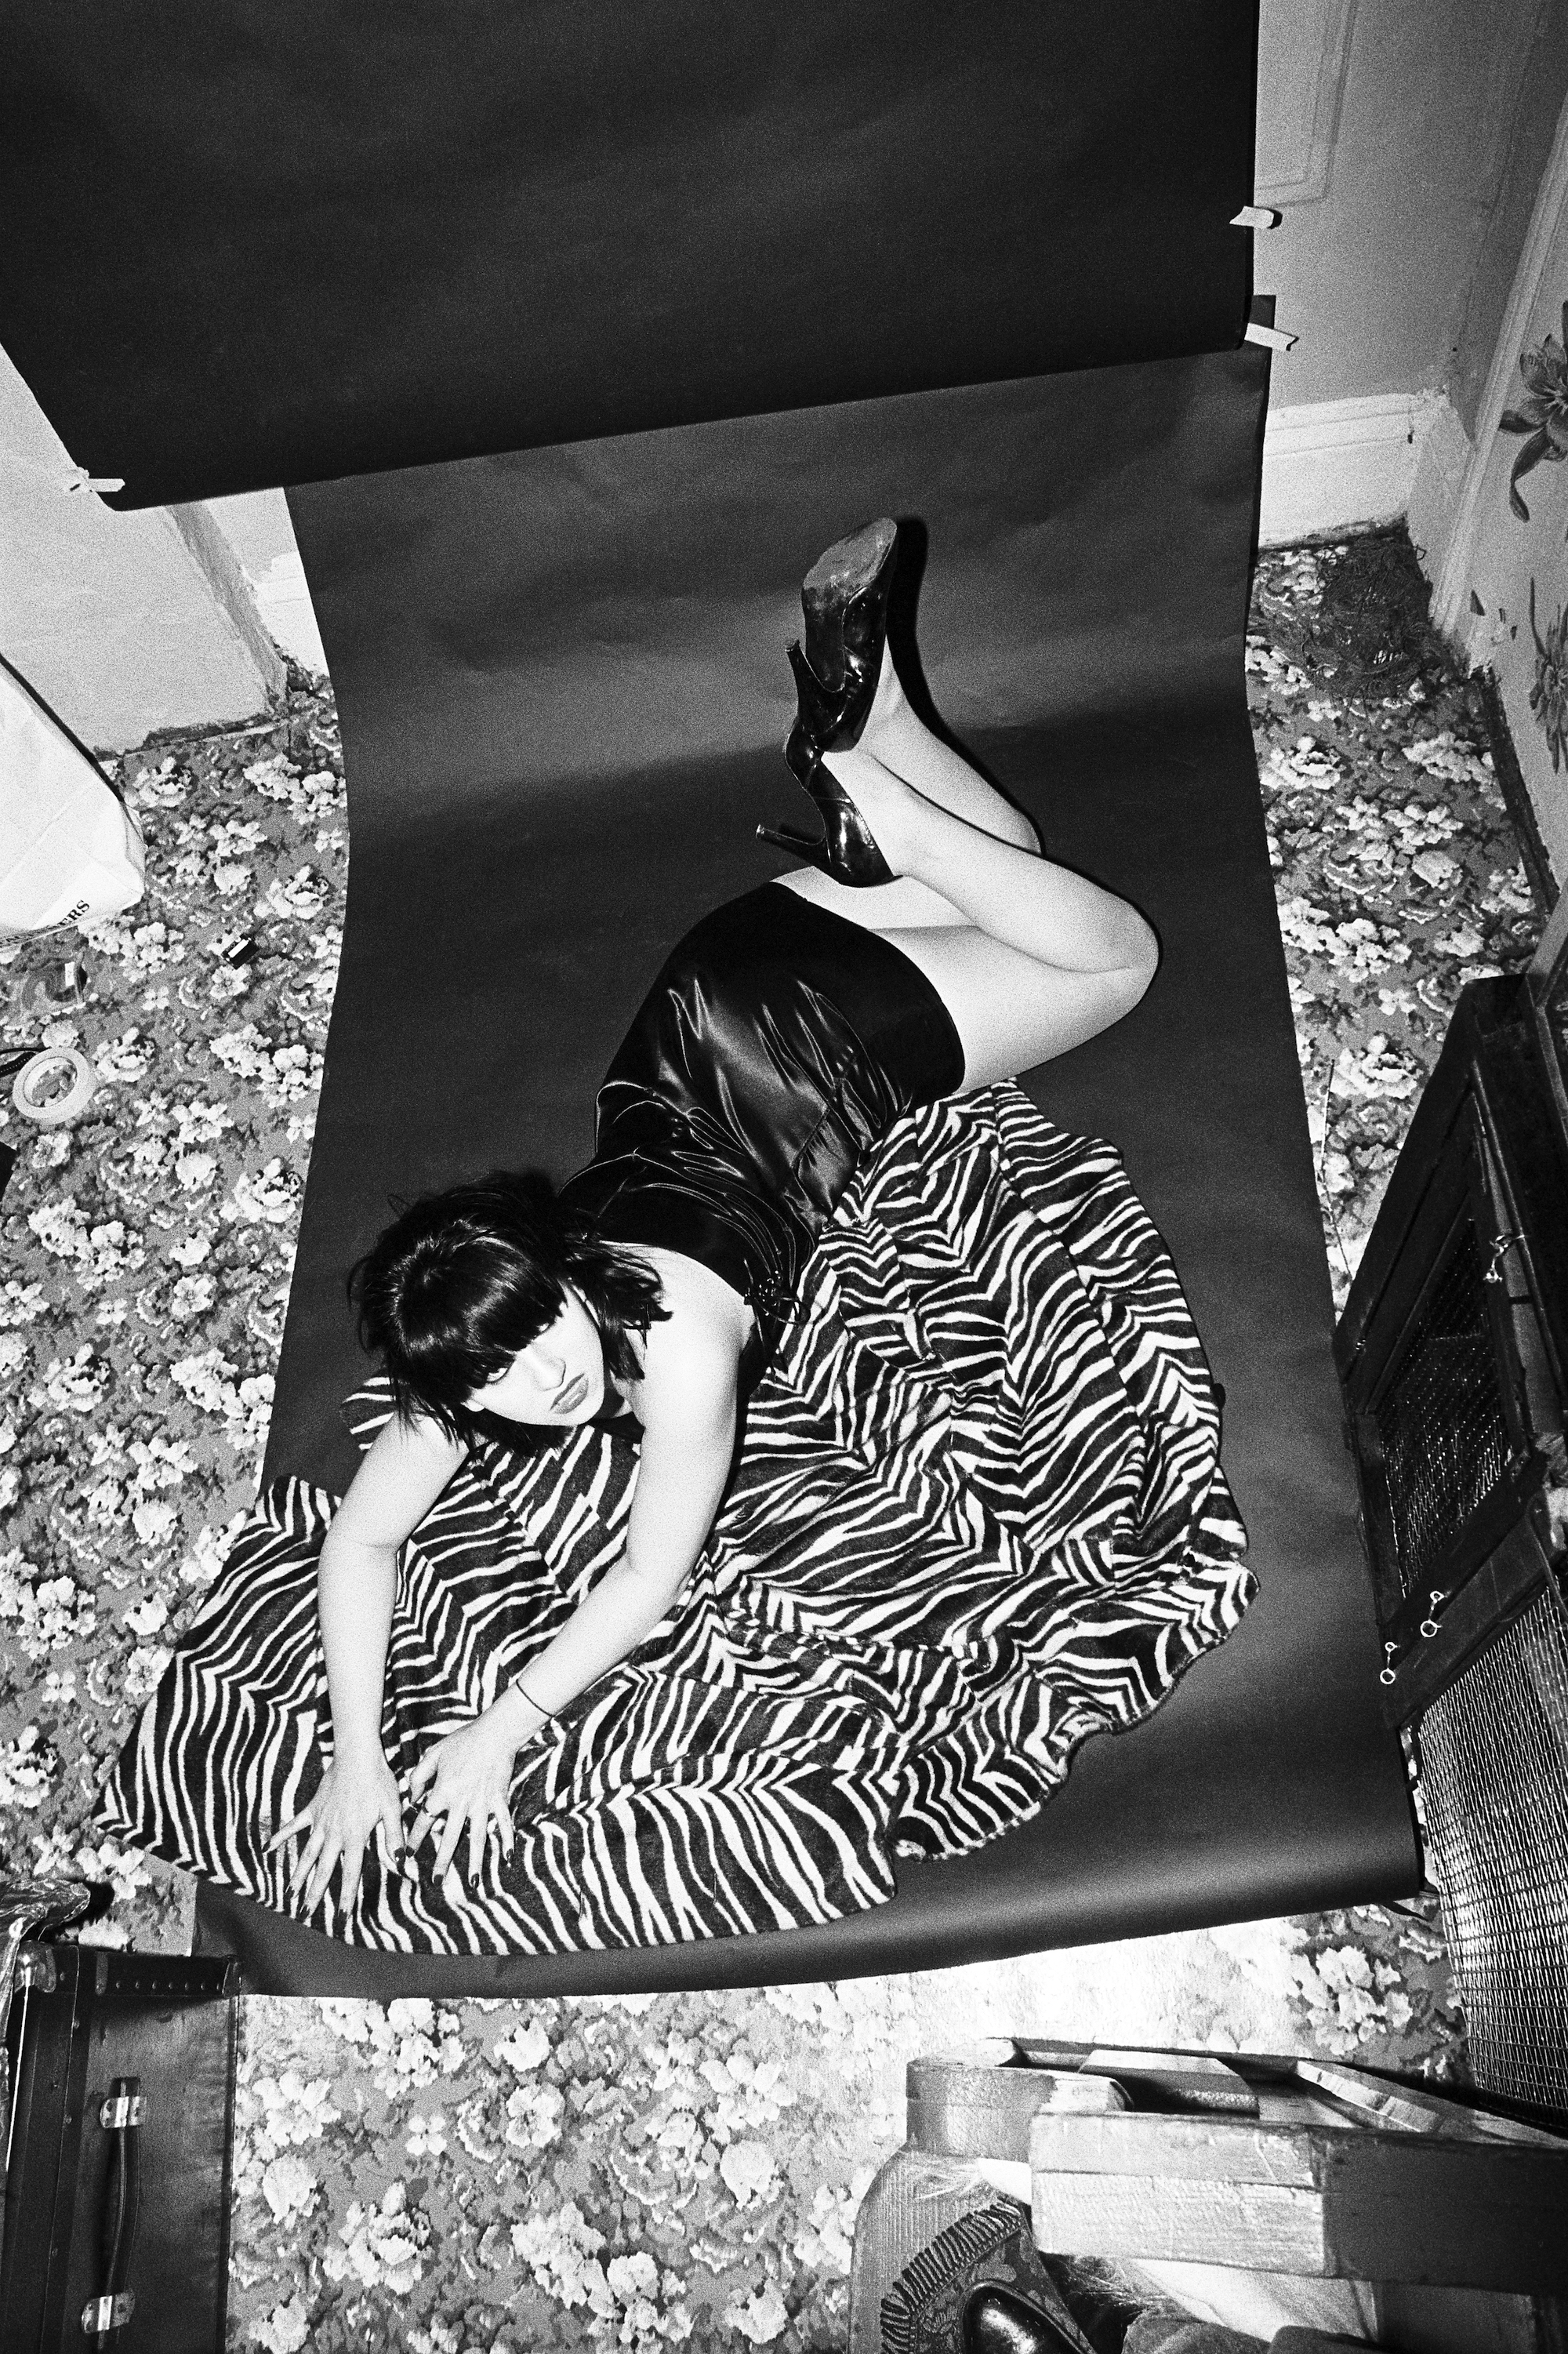 lydia lunch lying on a zebra coat in her east village apartment on the floor